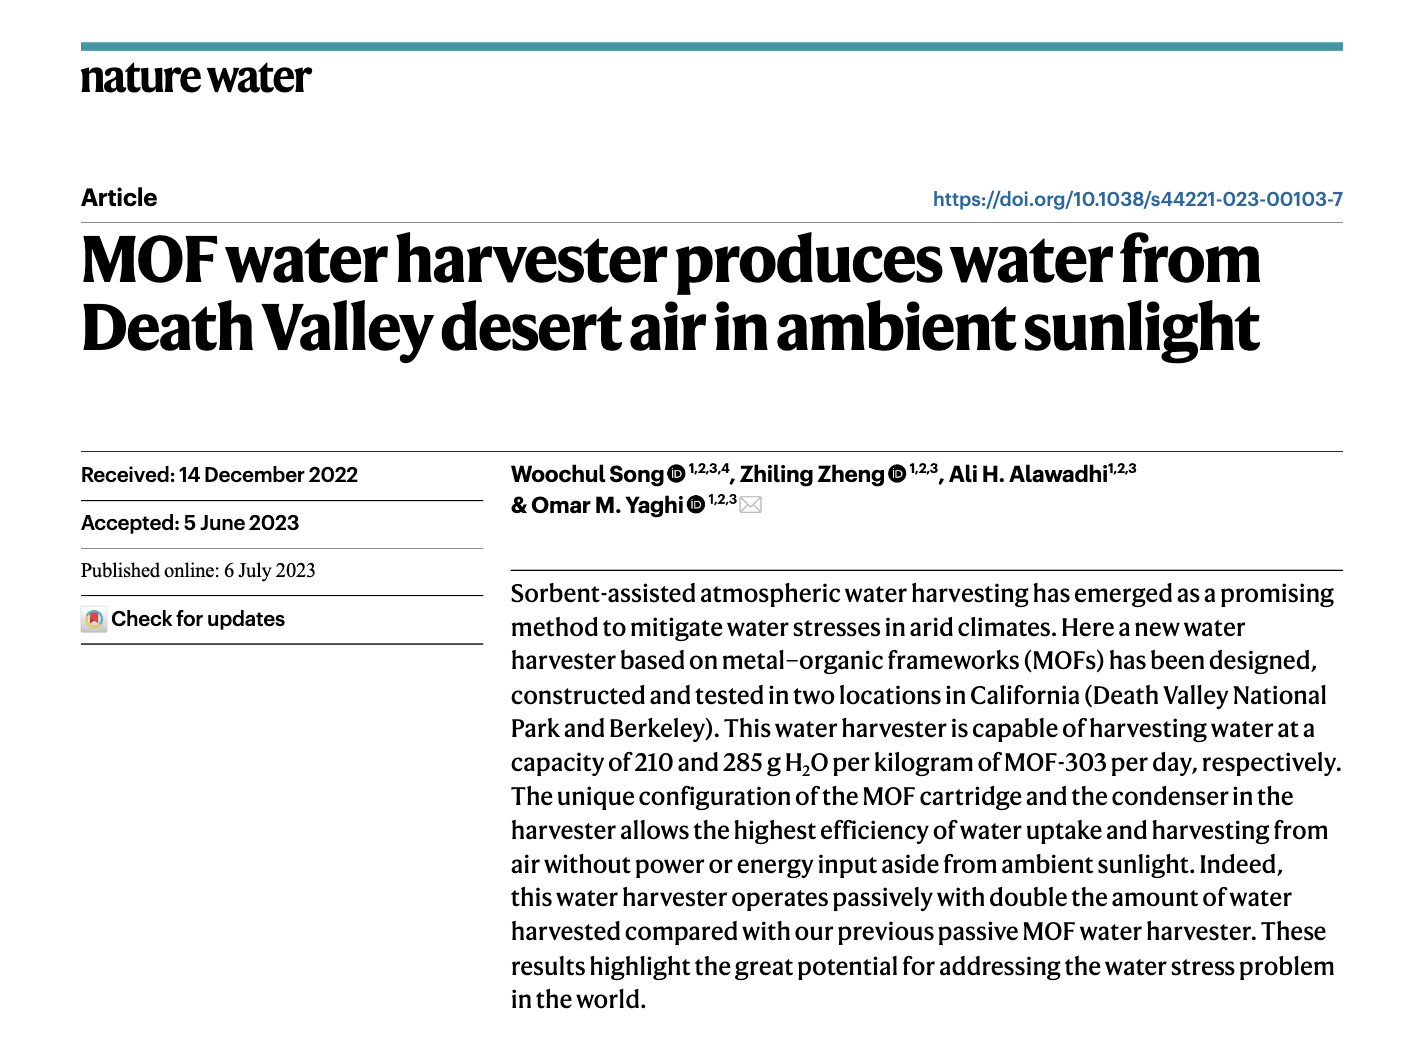 MOF water harvester produces water from Death Valley desert air in ambient sunlight